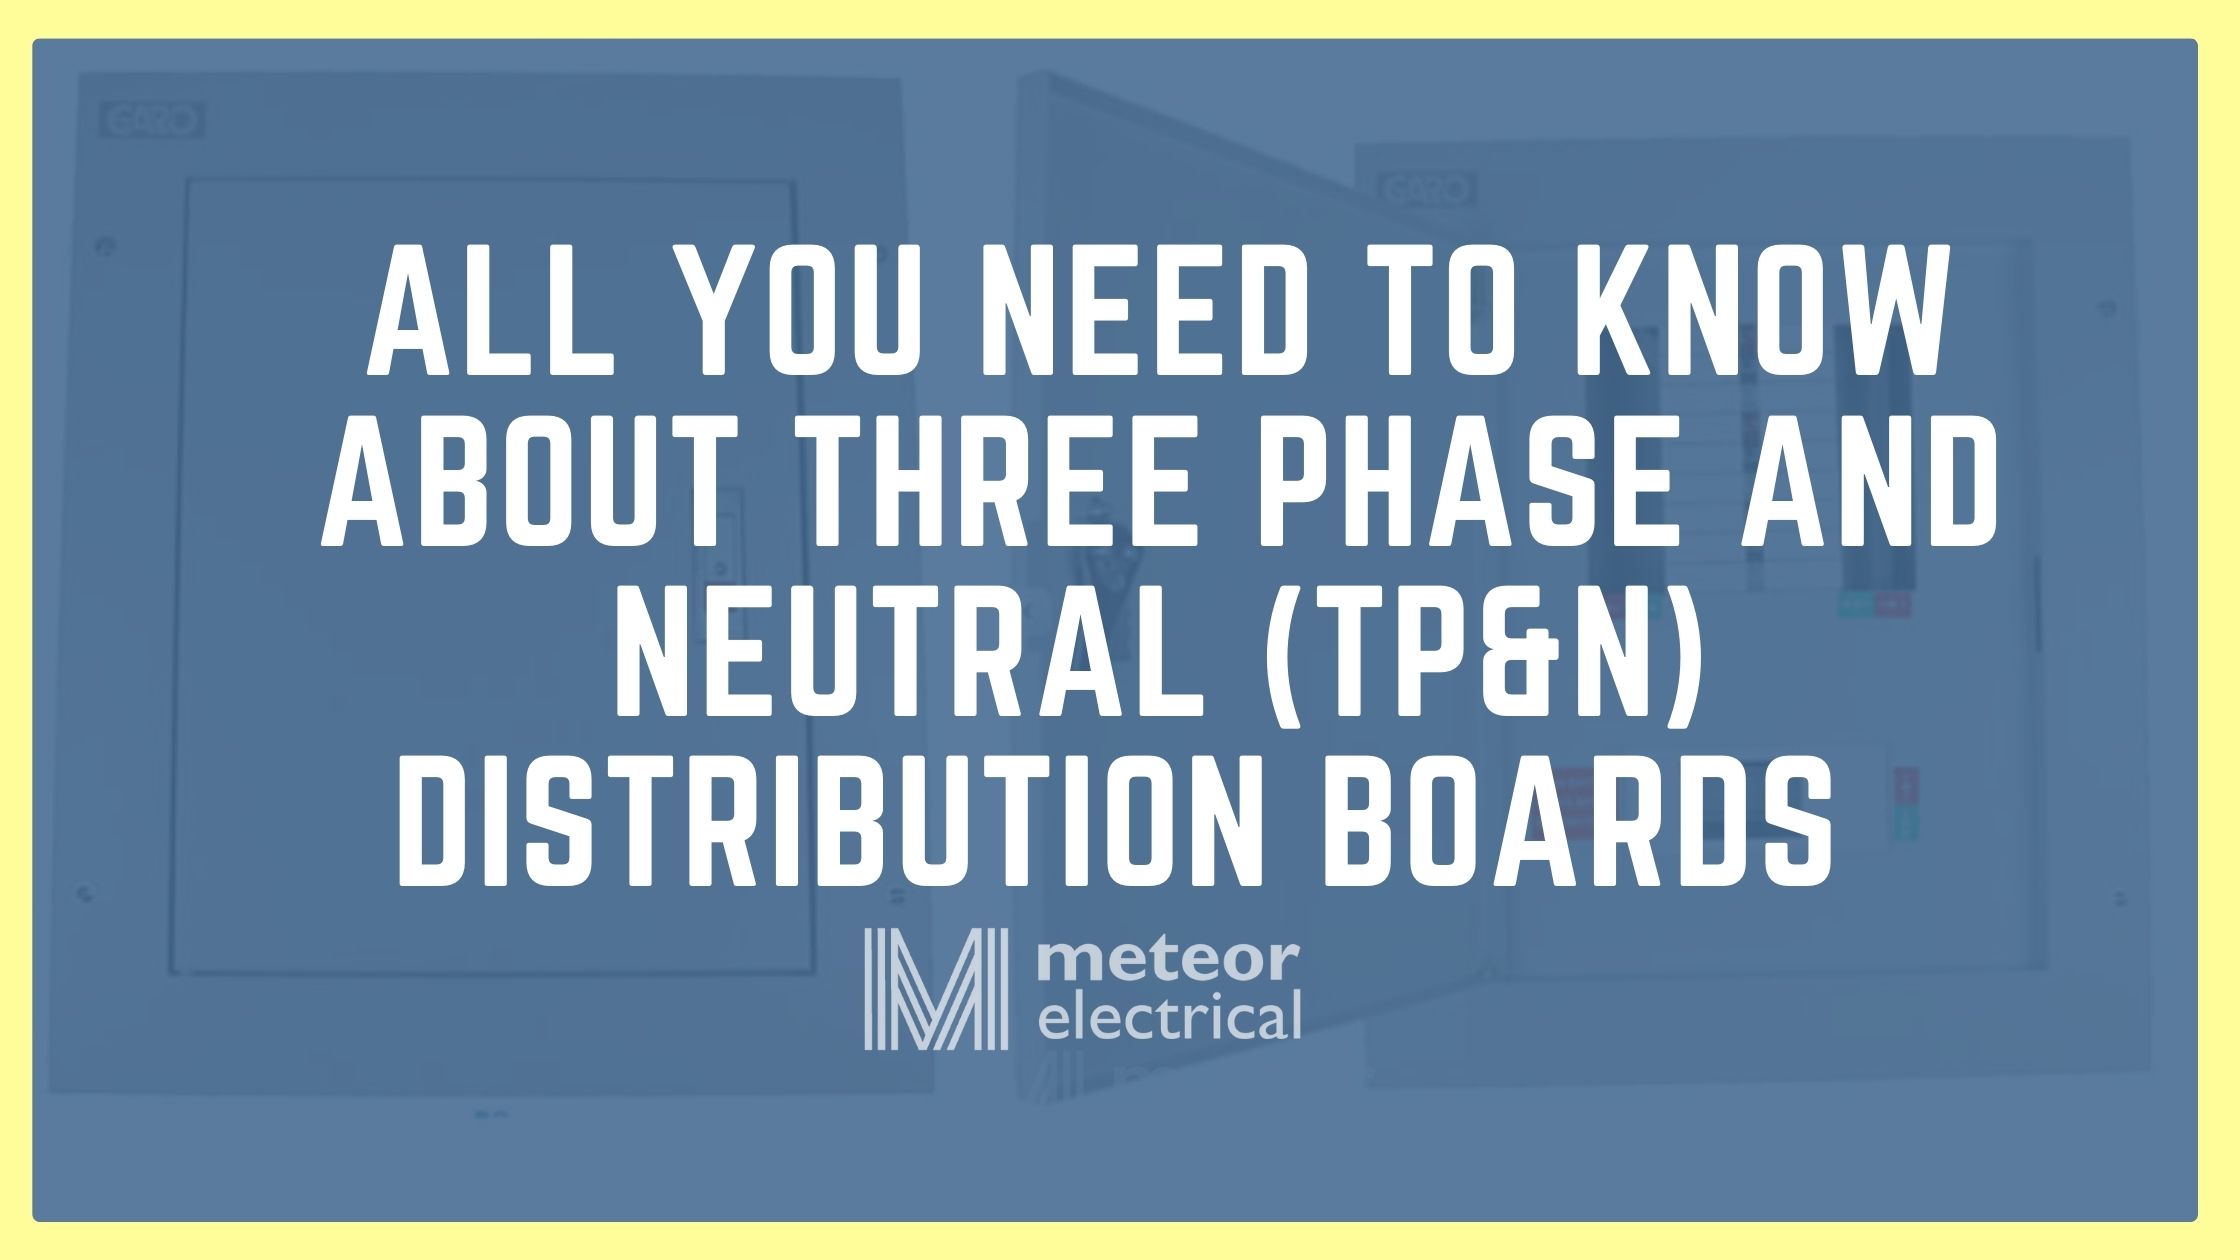 All You Need to Know About Three Phase and Neutral (TP&N) Distribution Boards